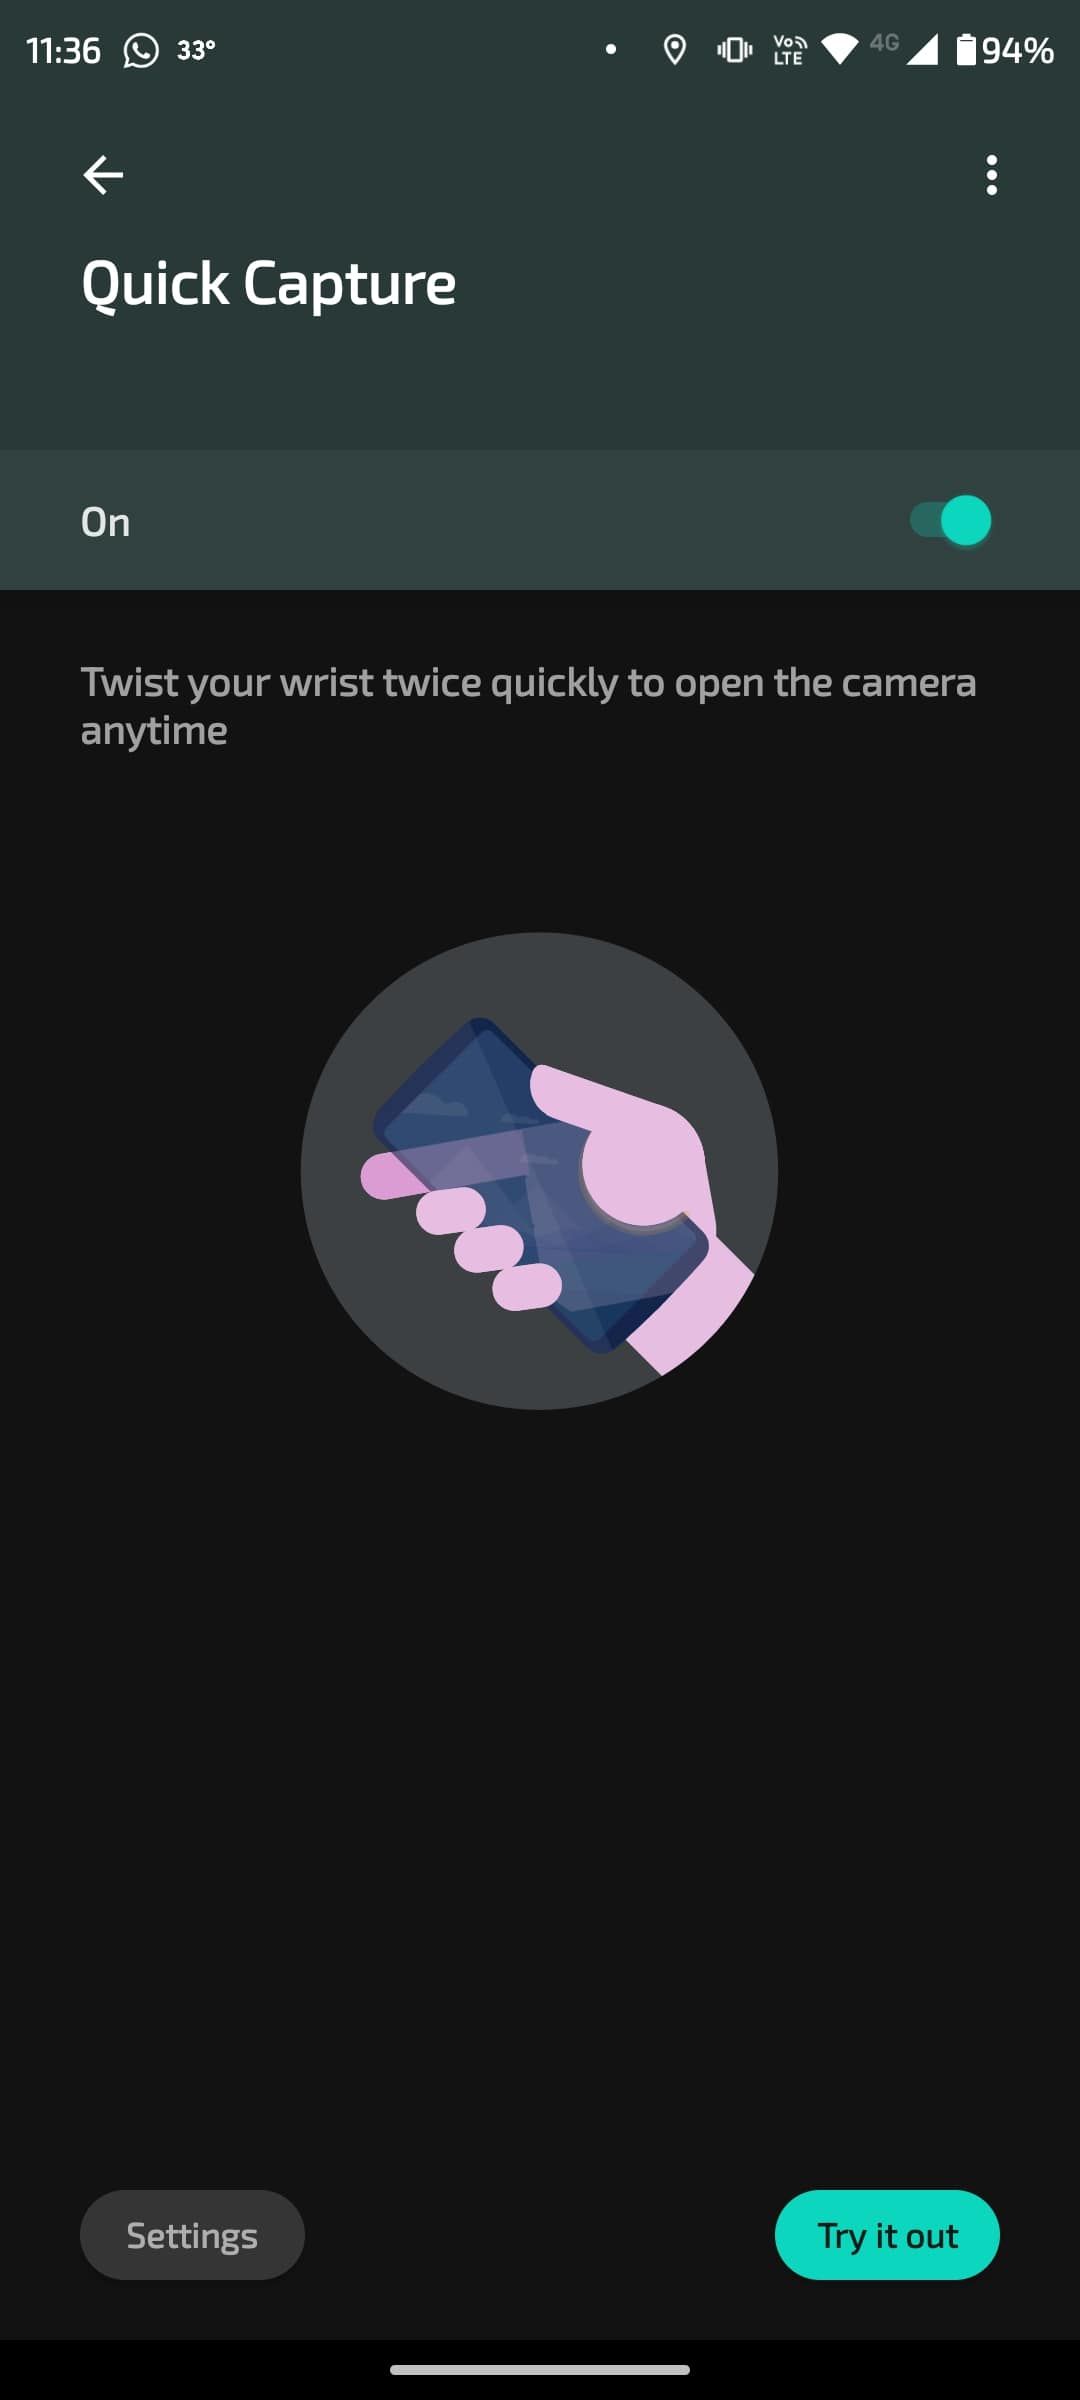 Quick capture menu with hand holding phone